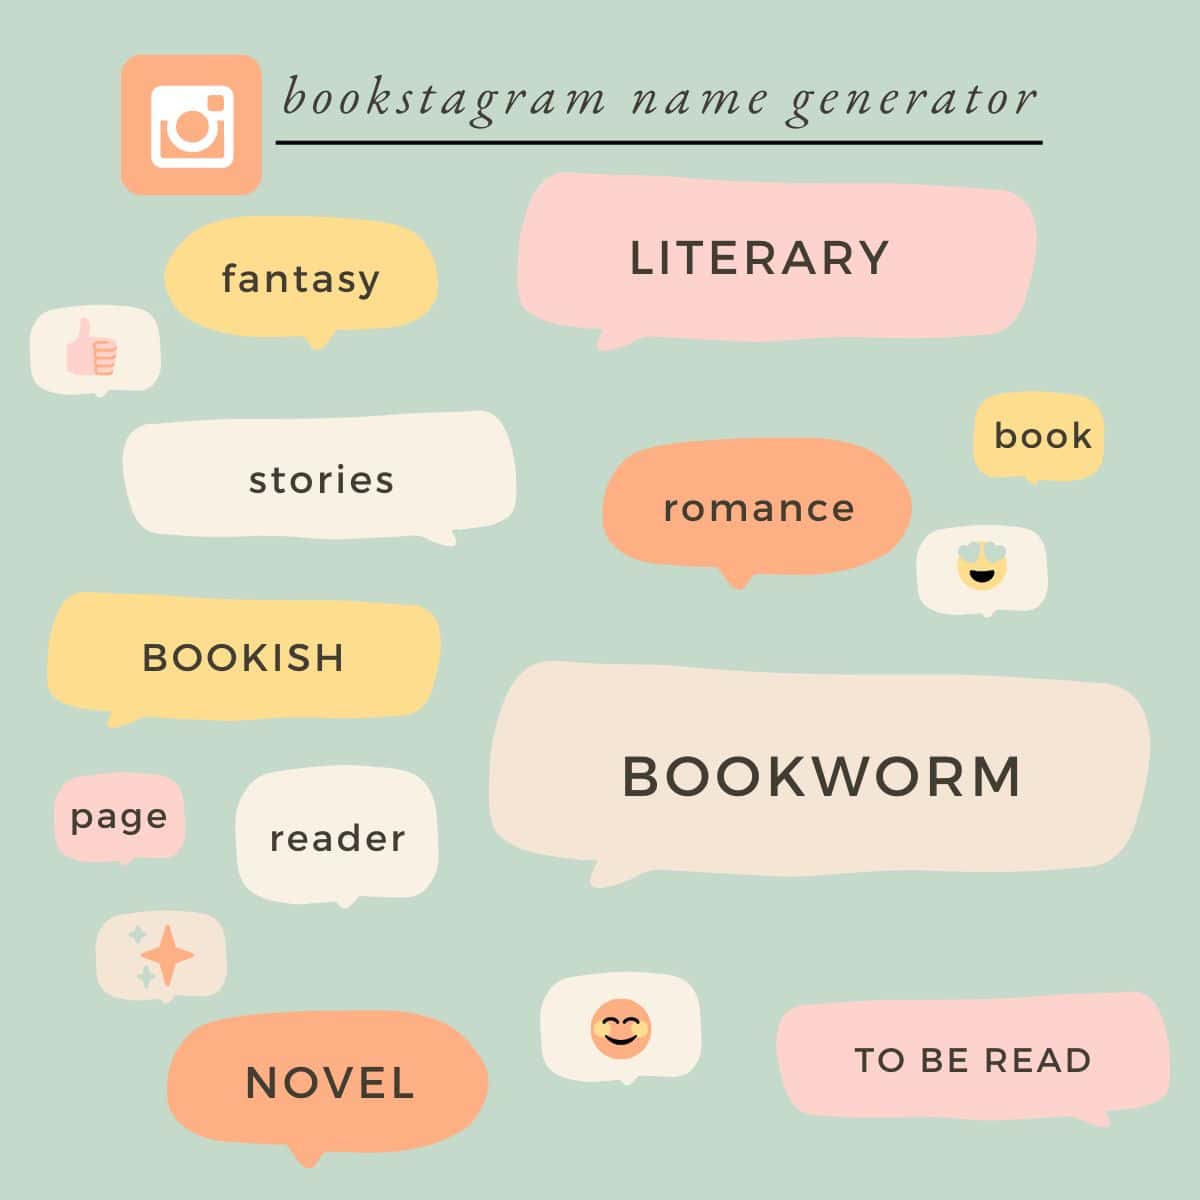 collage of words to use in your bookstagram name generator.